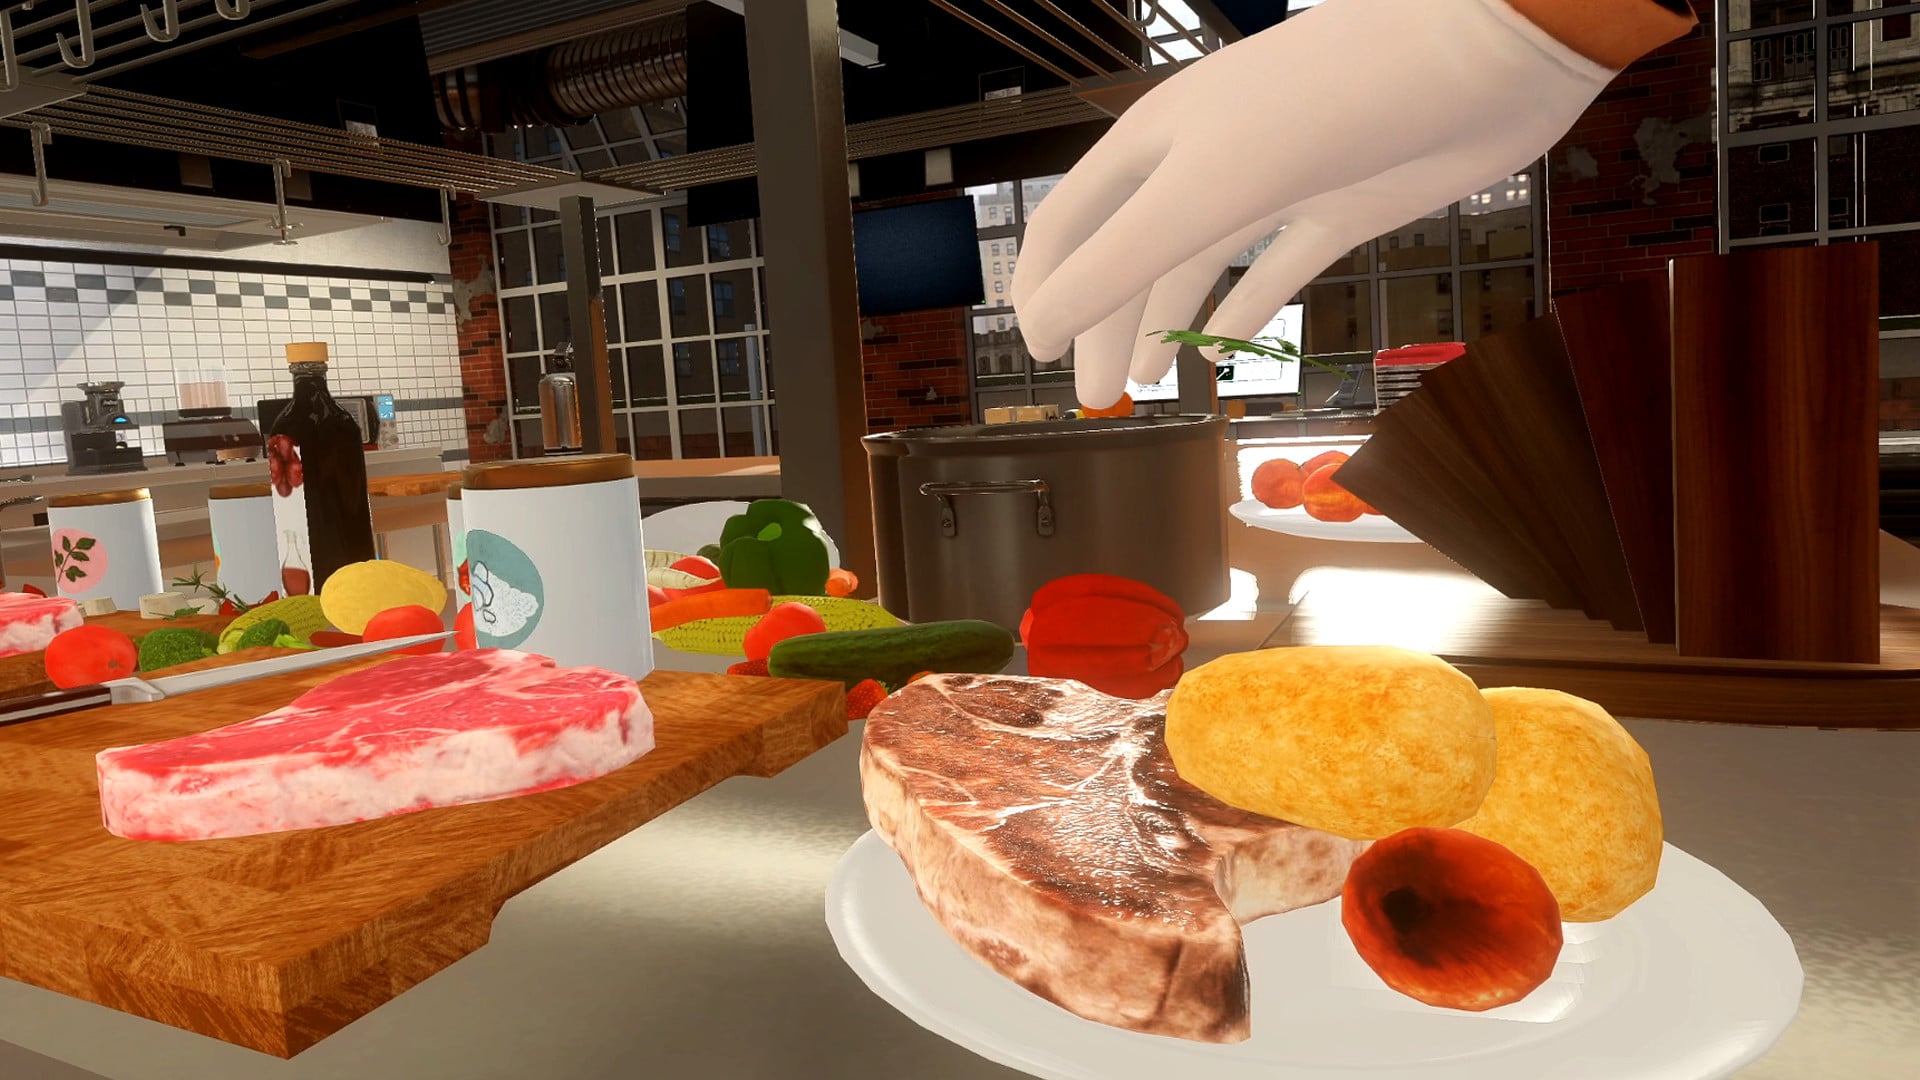 Cooking Simulator VR review: A fine dining experience